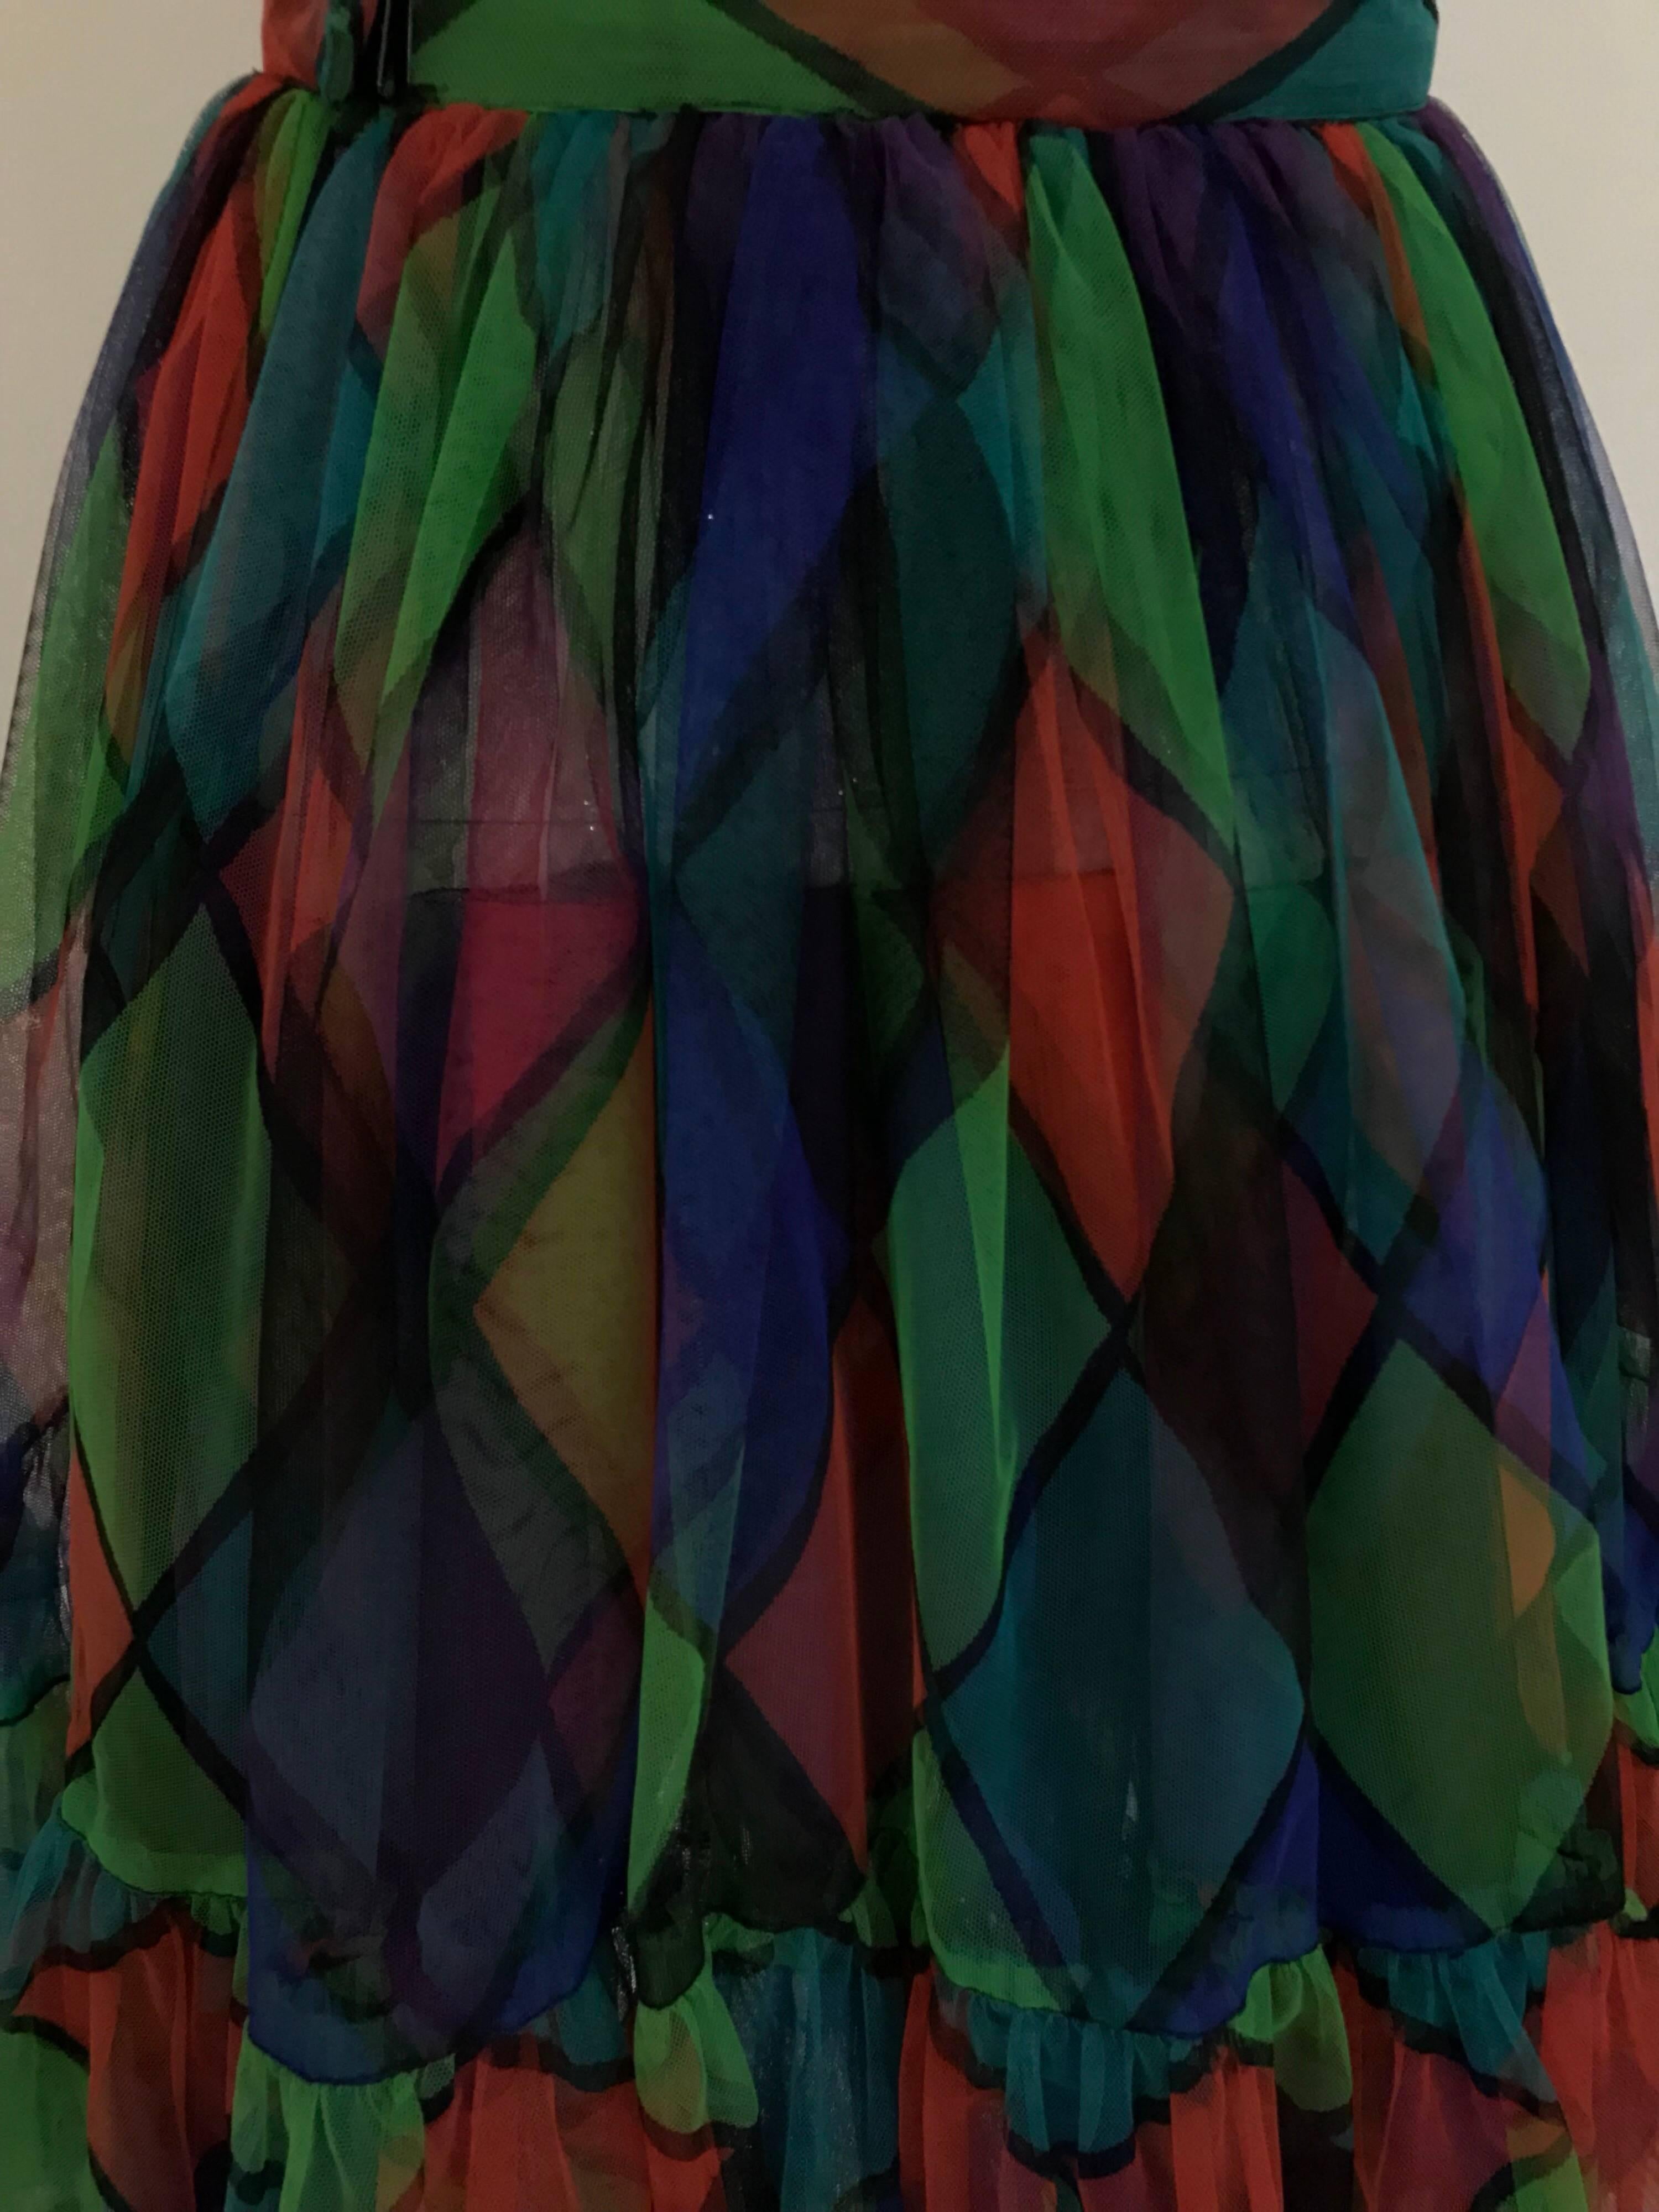 Vintage Saint Laurent Green and Red Harlequin Print Tulle Skirt In Excellent Condition For Sale In Beverly Hills, CA